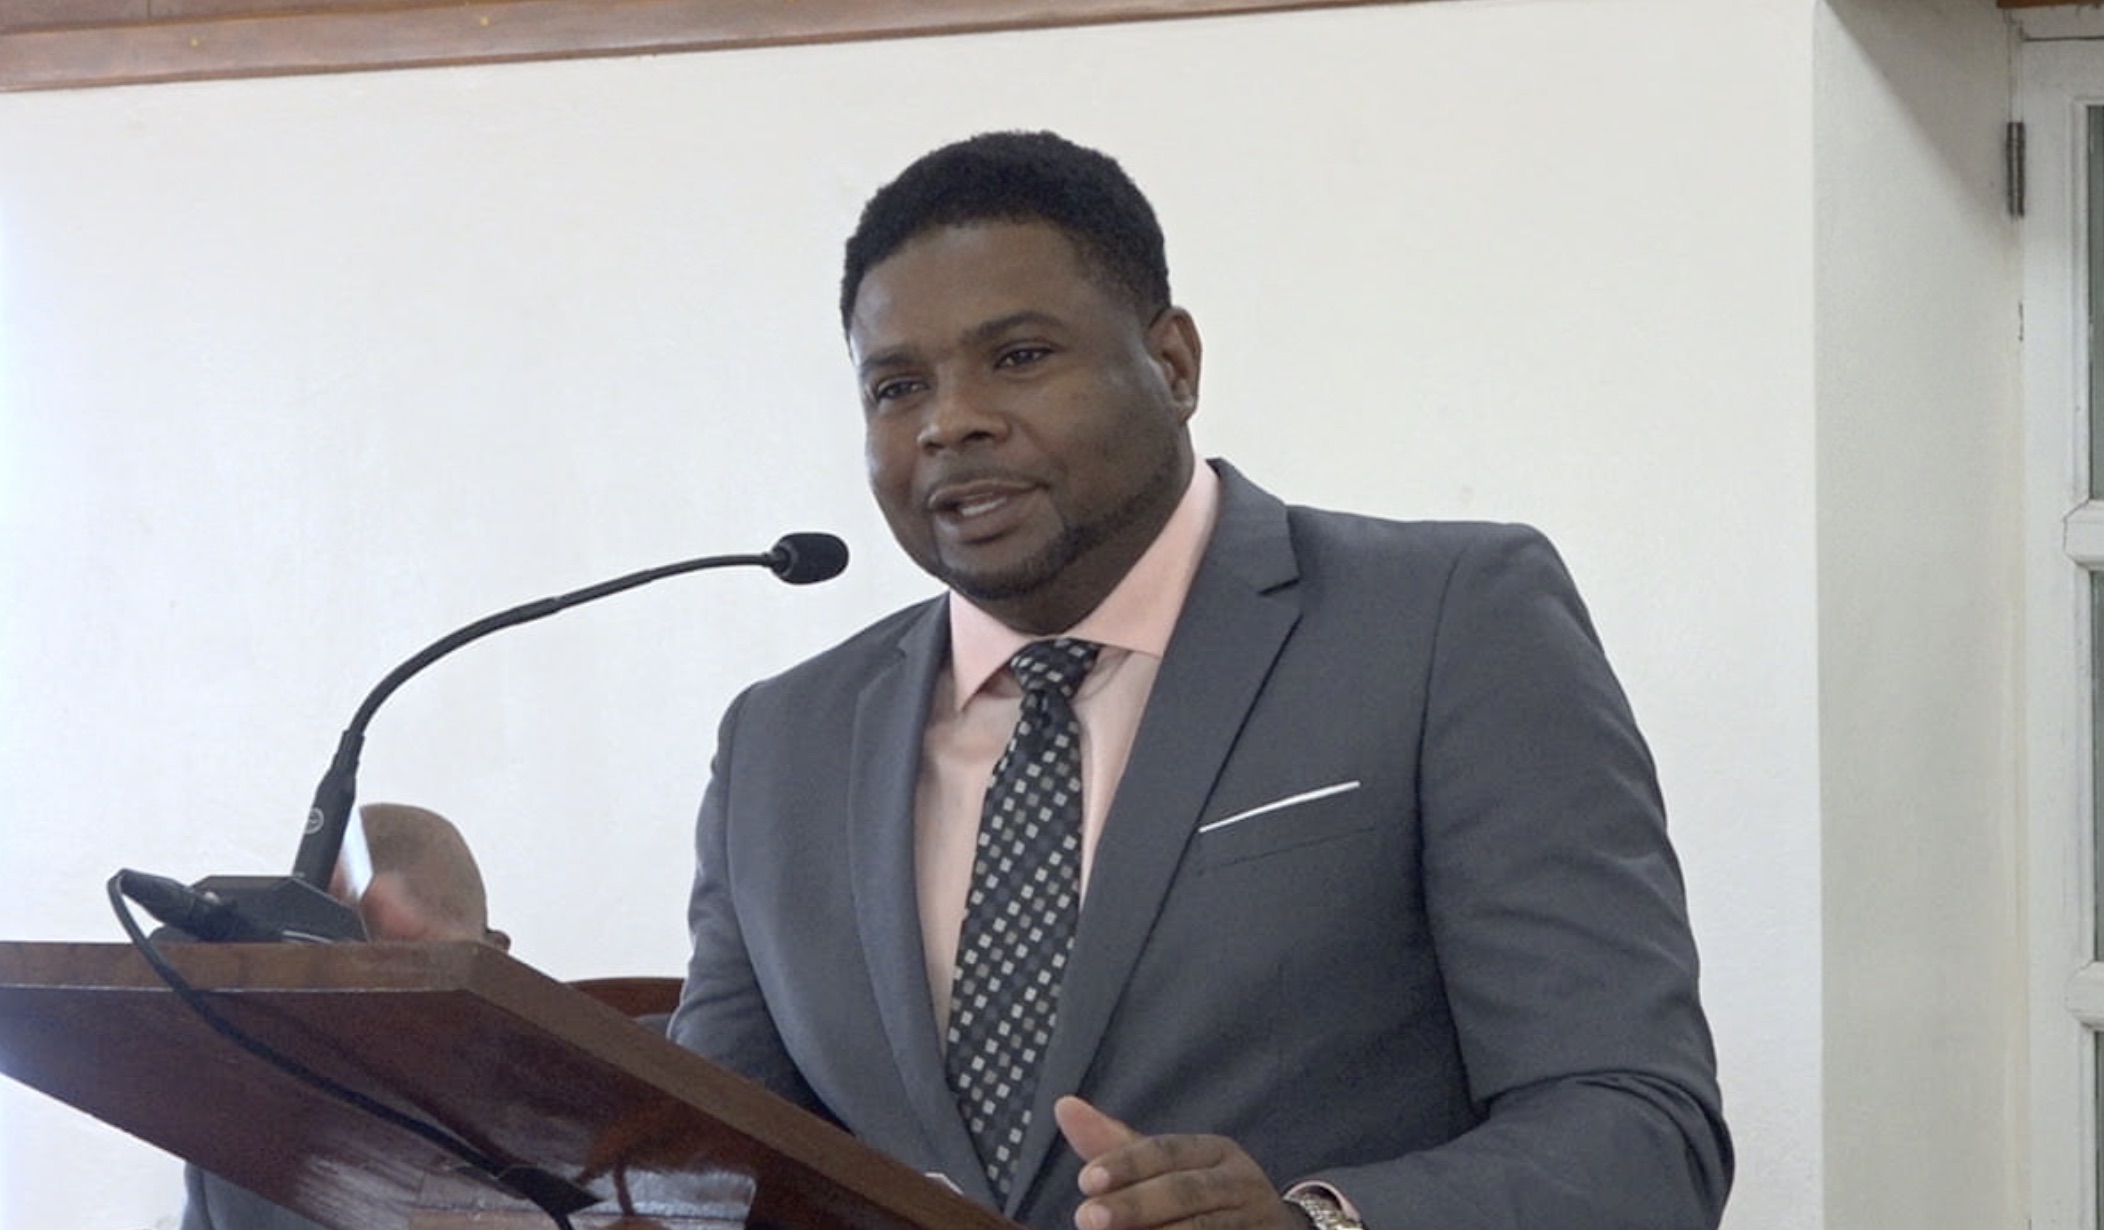 Hon. Troy Liburd Junior Minister of Education in the Nevis Island Administration making his presentation at a sitting of the Nevis Island Assembly in chambers at Hamilton House in Charlestown on November 05, 2020